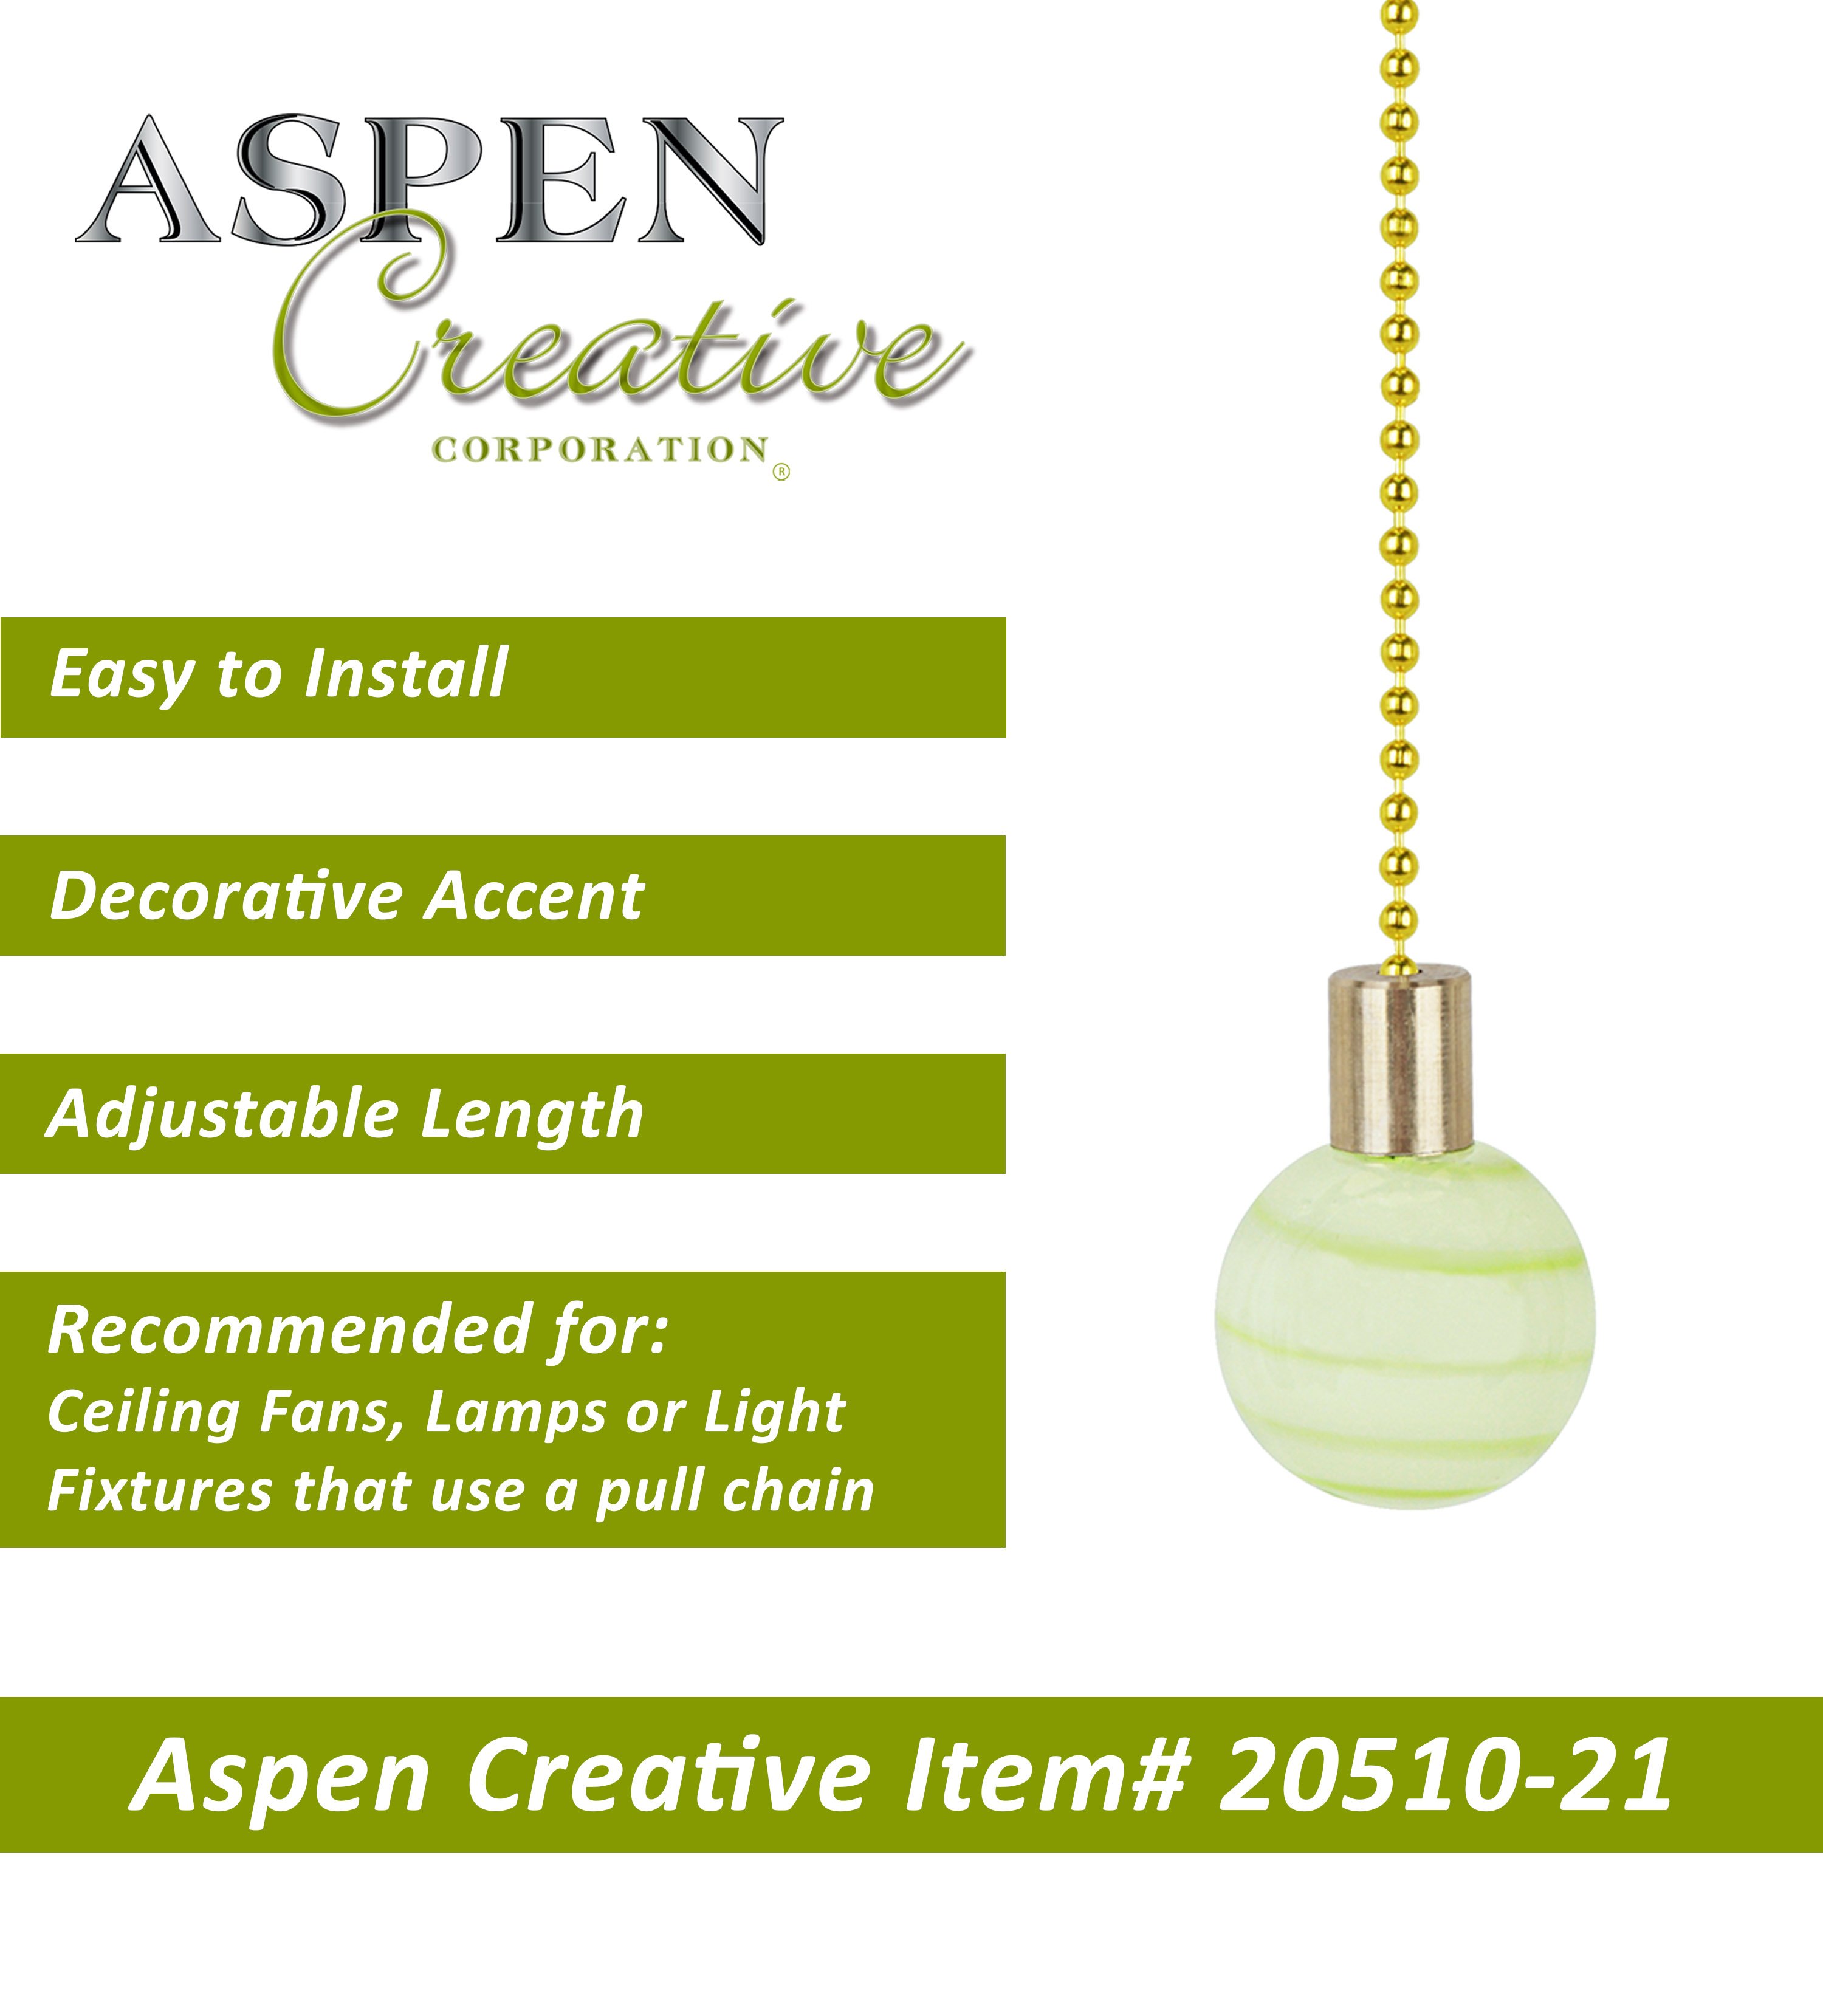 Aspen Creative 20510-22, 12" Light Green with Green Grain Glass Knob with Pull Chain in Copper, 2 Pack - image 3 of 8